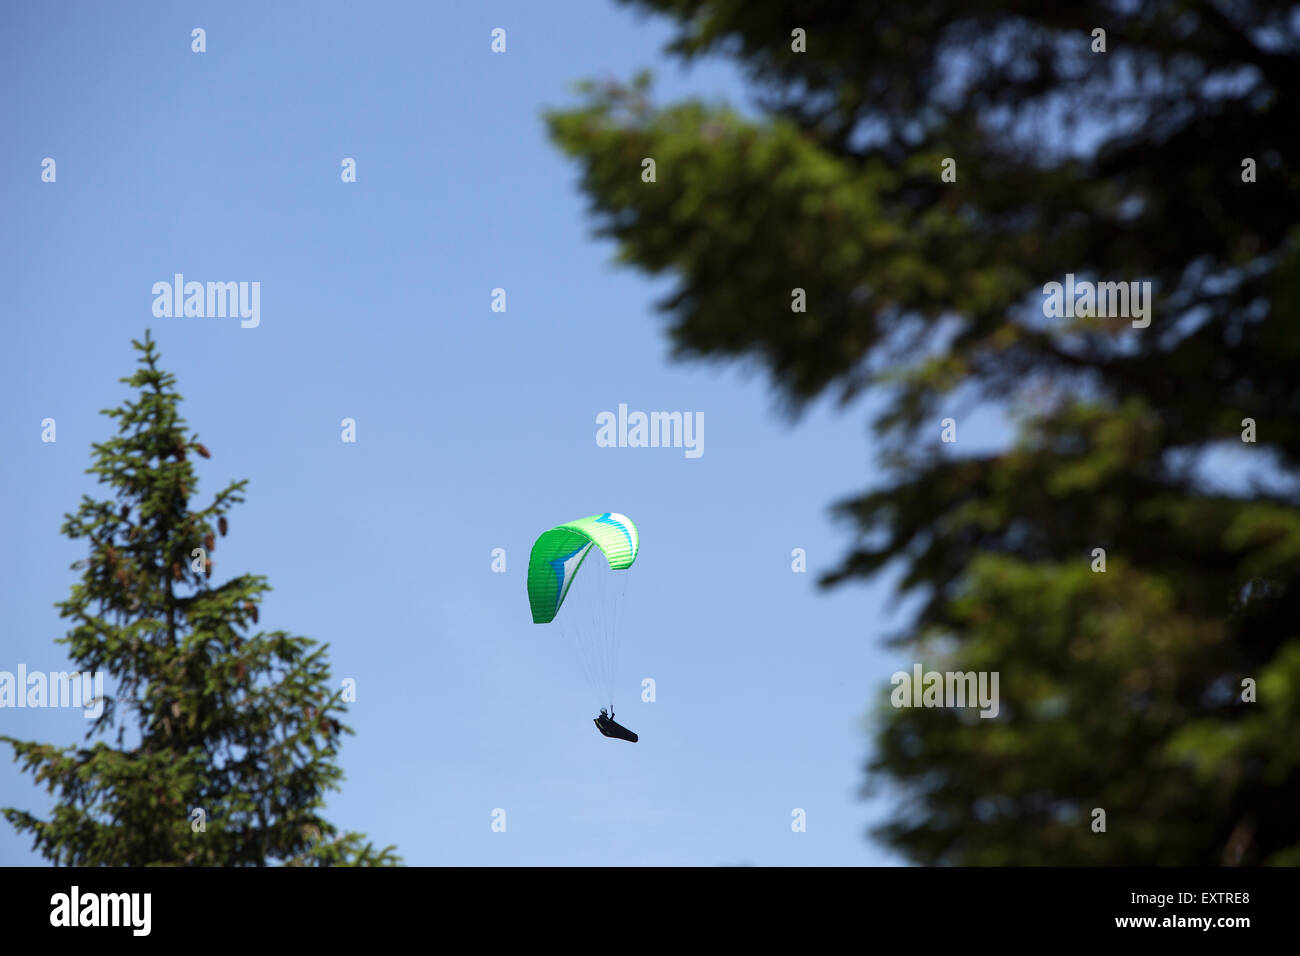 Green paraglider flying between trees Stock Photo